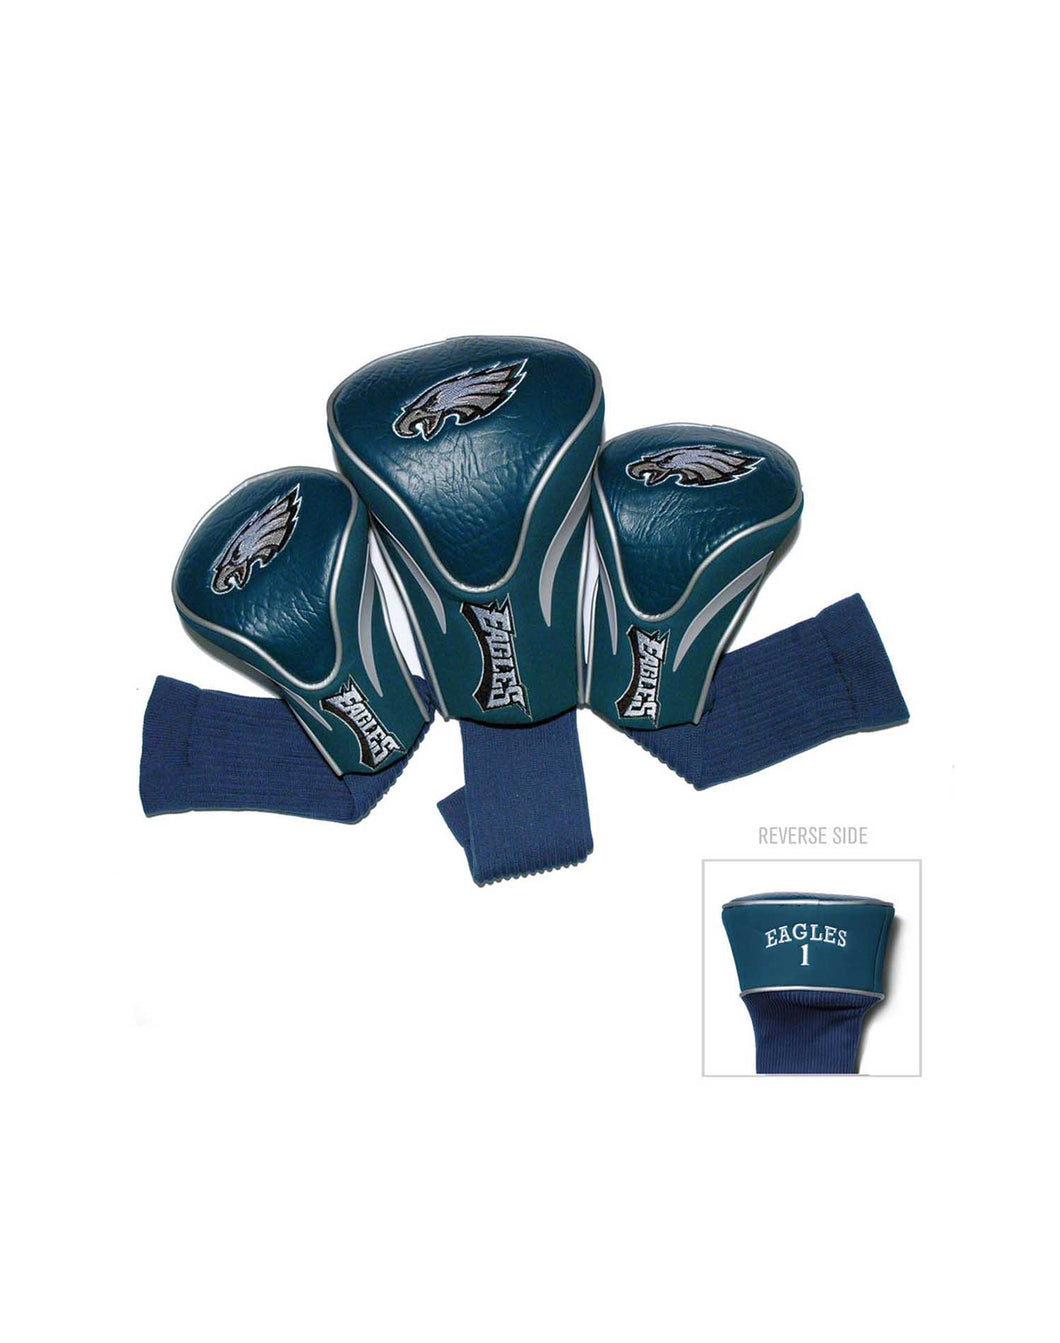 NFL Official Set of 3 Contour Golf Driver, 3 and X Headcovers. Philadelphia Eagles.